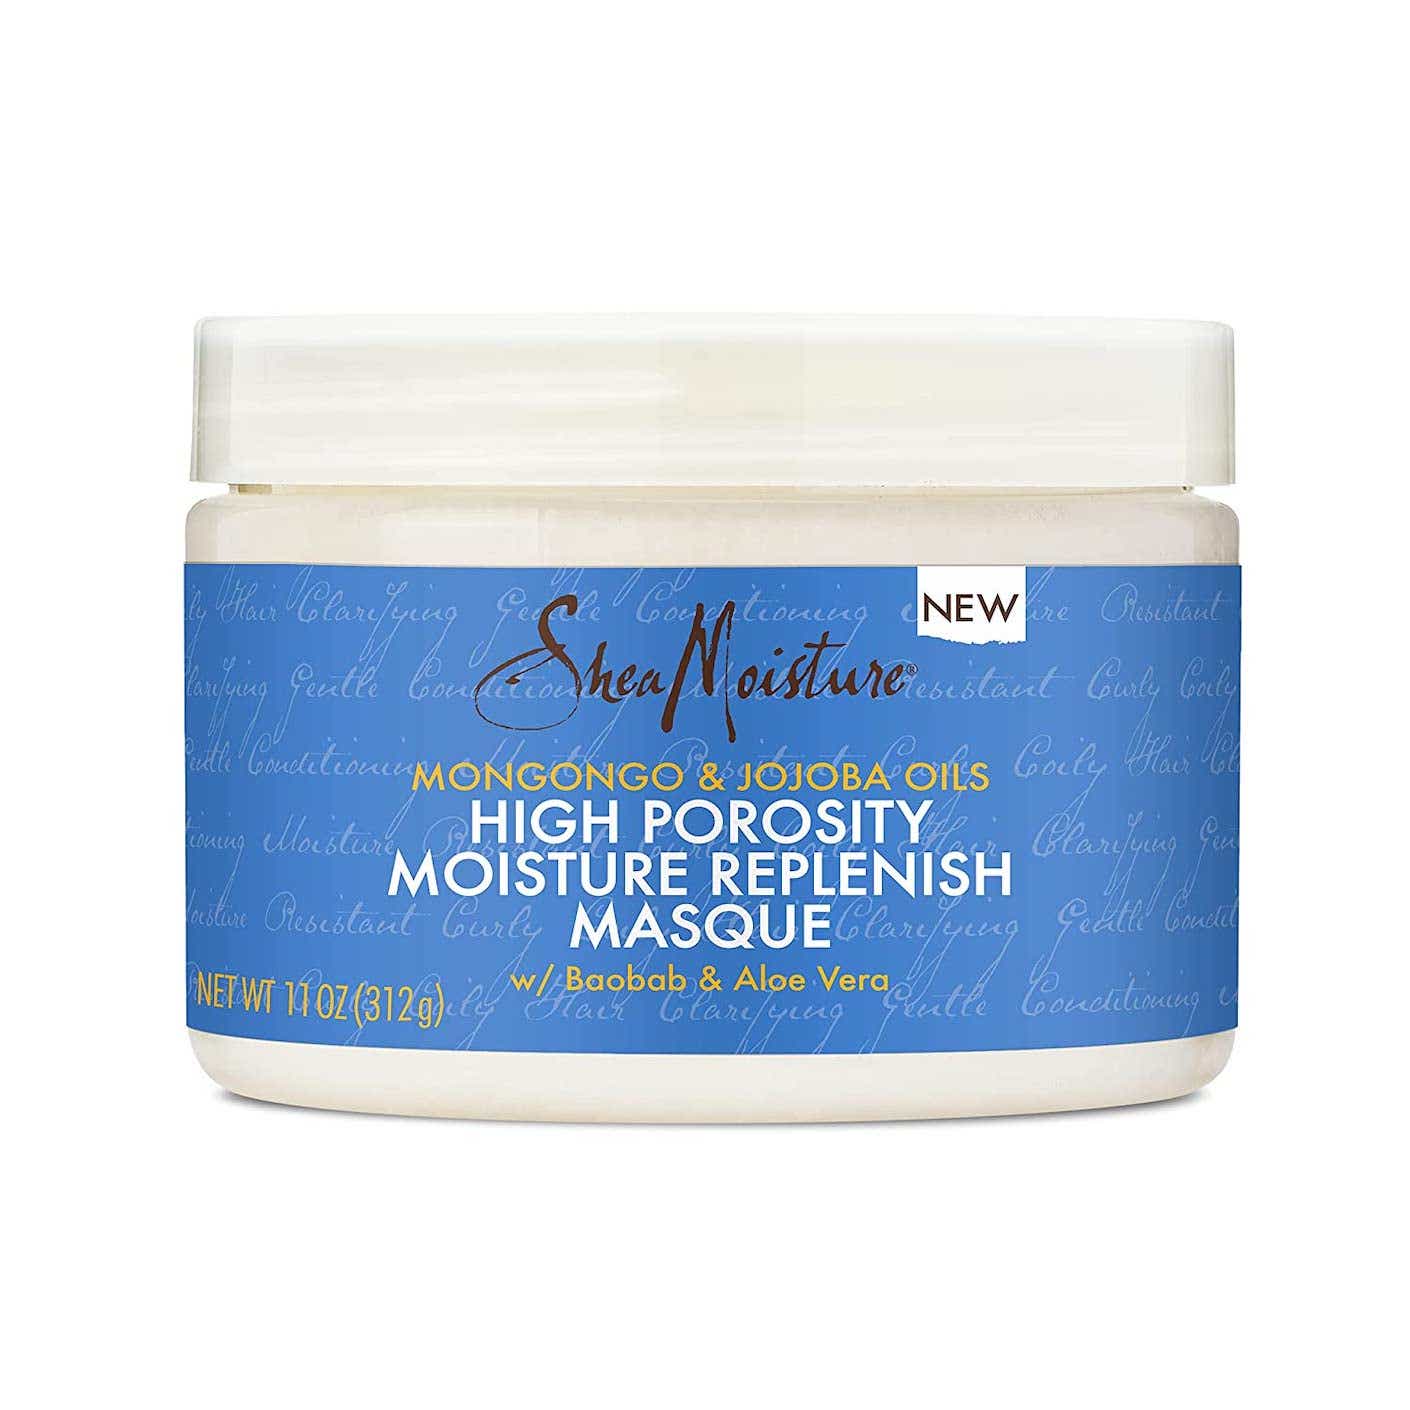 A clear tub of creamy hair conditioner sits in front of a white background.